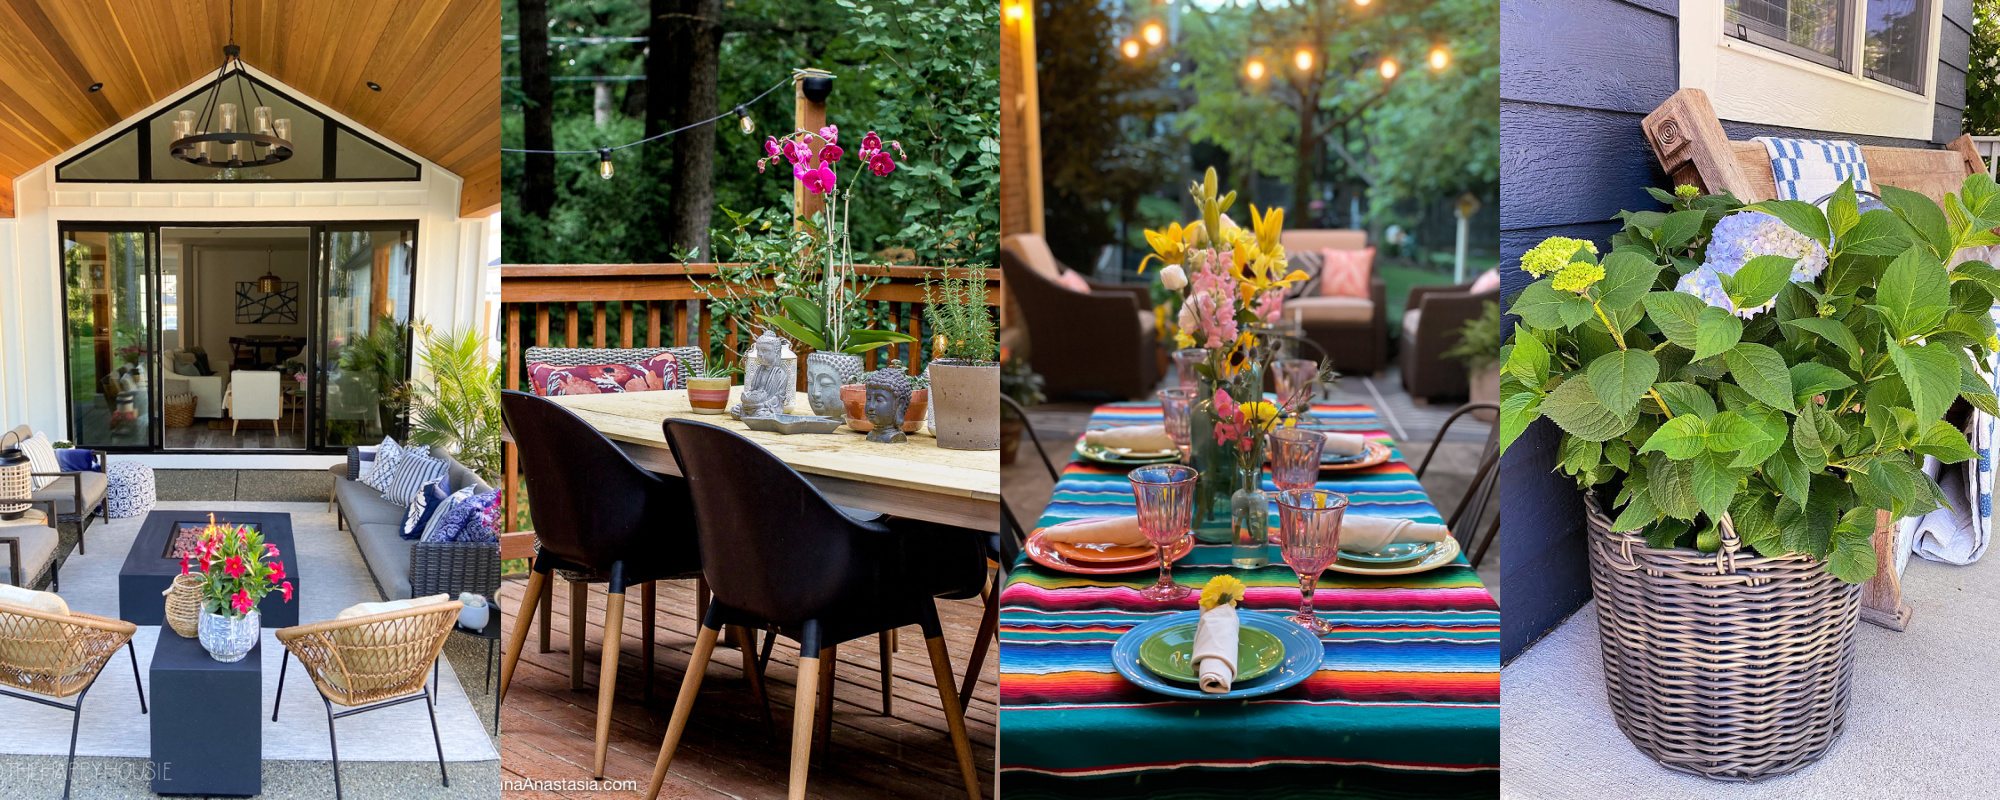  Family Patio Ideas by popular Alabama life and style blog, She Gave It A Go: collage image of a patio with wicker furniture and a gas fire pit, outdoor dining table with black chairs and bistro lights, table set with a Mexican blanket table cloth, yellow, pink and red floral arrangements, and colorful glass dish wear, and a green plant in a wicker basket. 